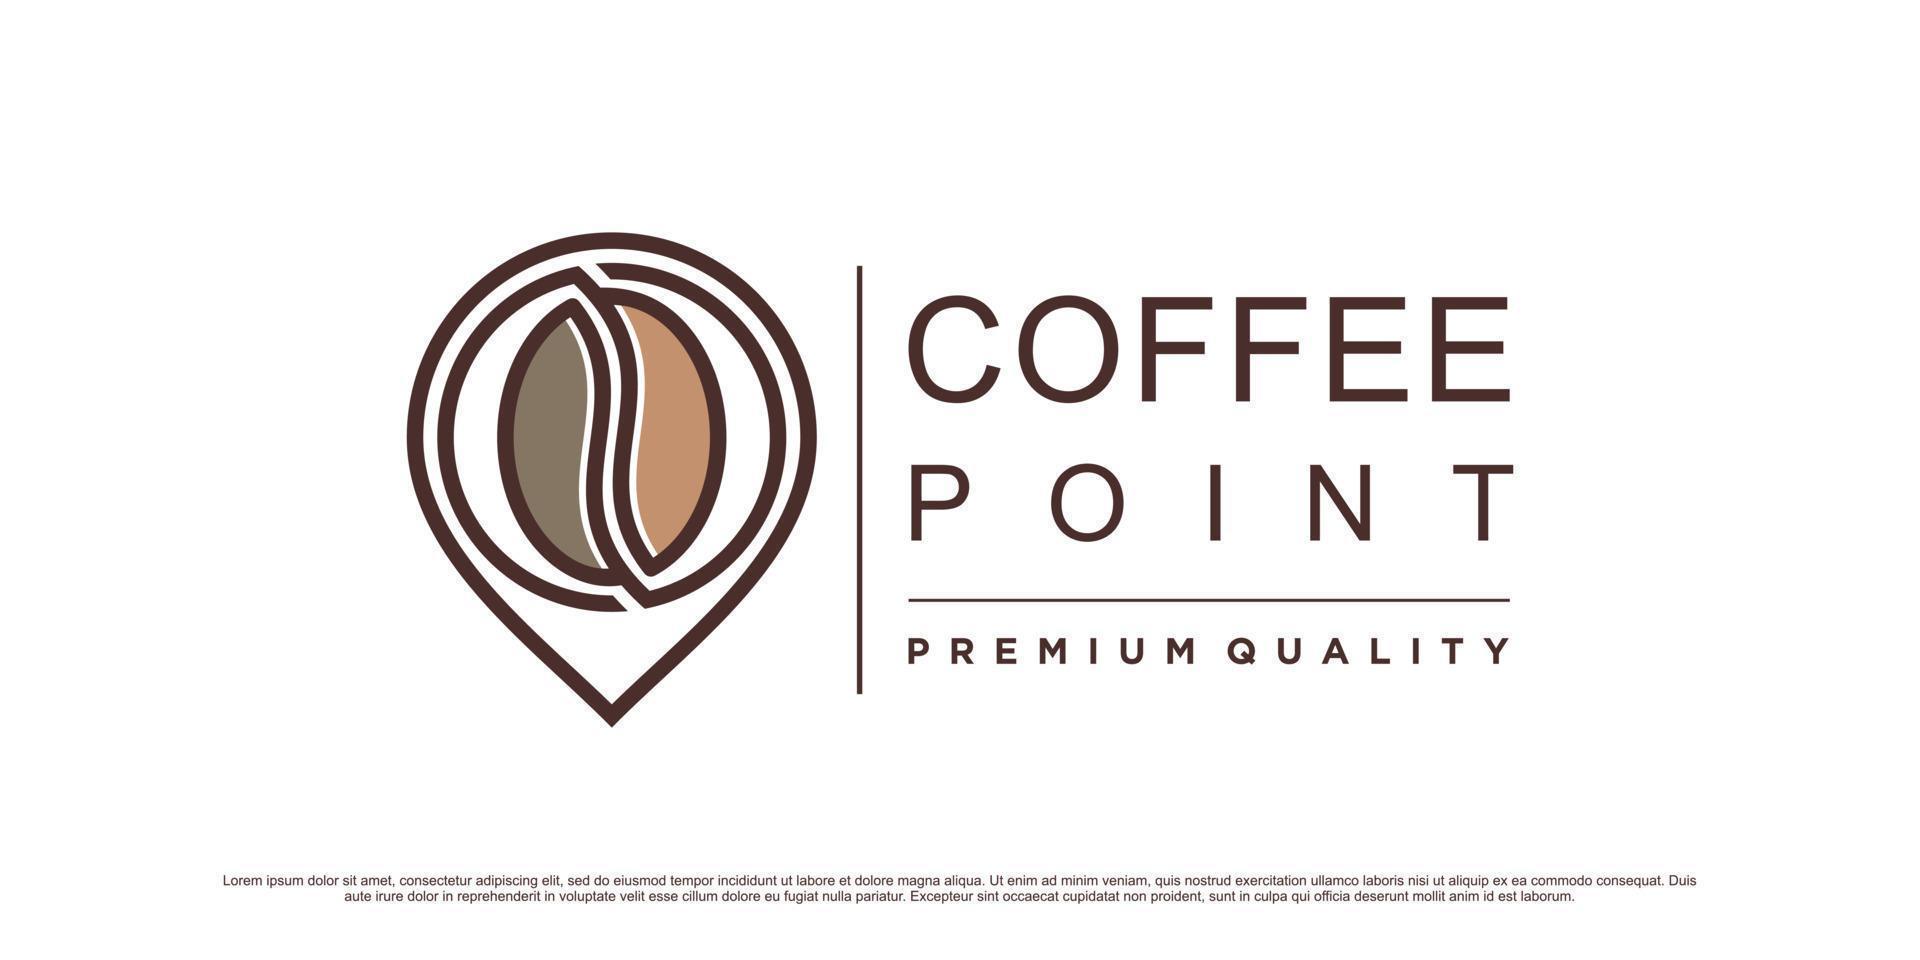 Coffee point logo design template for cafe or restaurant with location icon and creative element vector